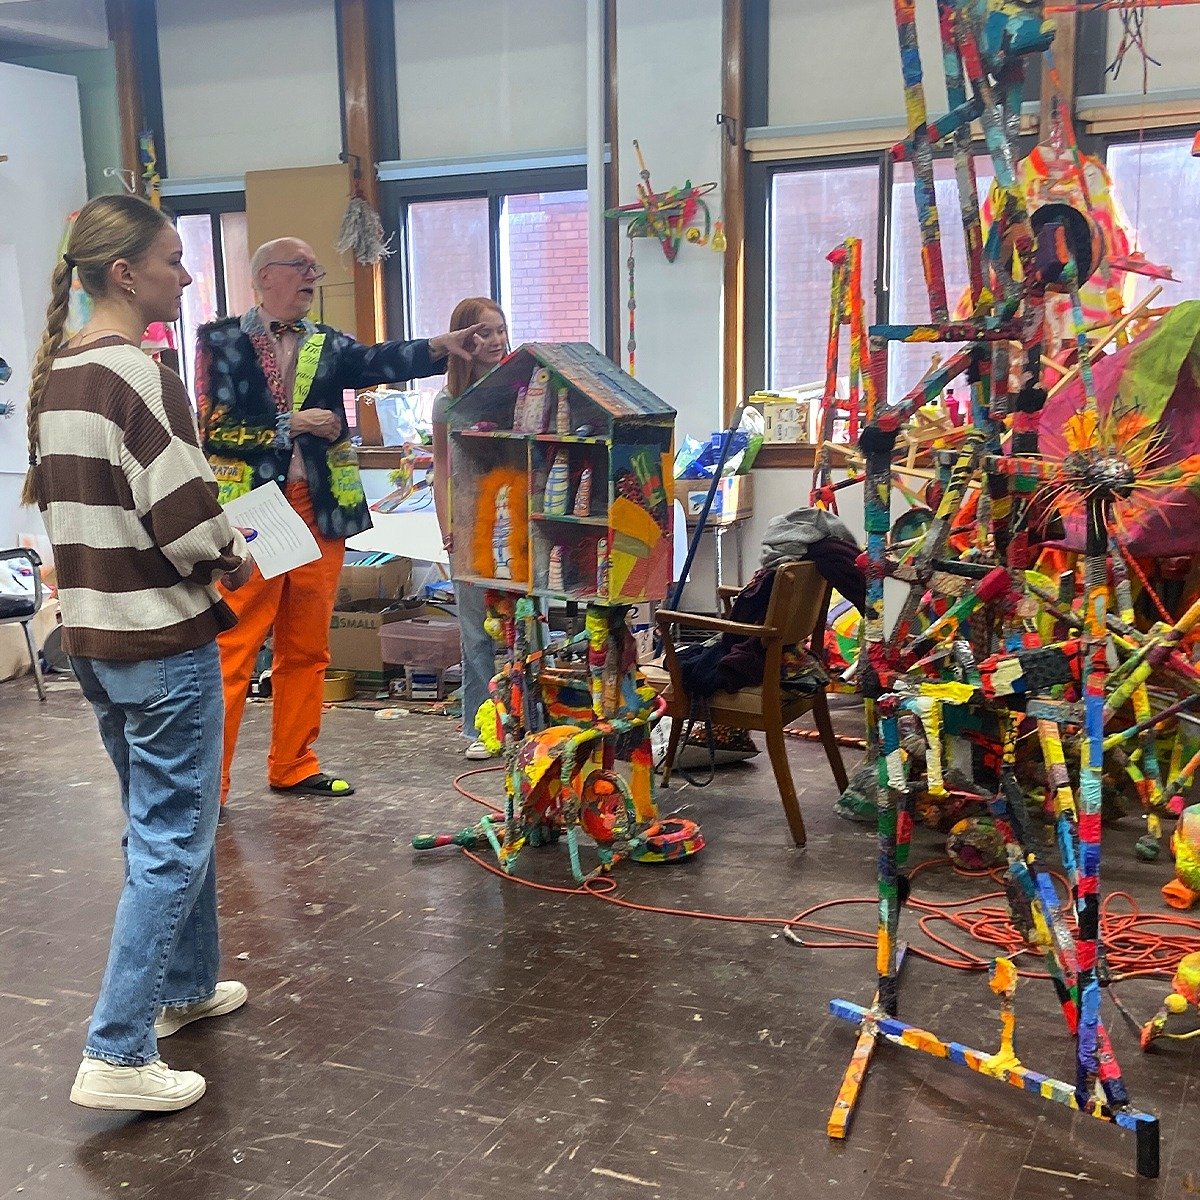 Teen Arts Group (TAG) members recently went on a field trip to St. Mary&rsquo;s Artist Studios in Michigan City, IN. During their visit, members met 8 local artists, explored their studios, and engaged in discussions about maintaining a successful ar